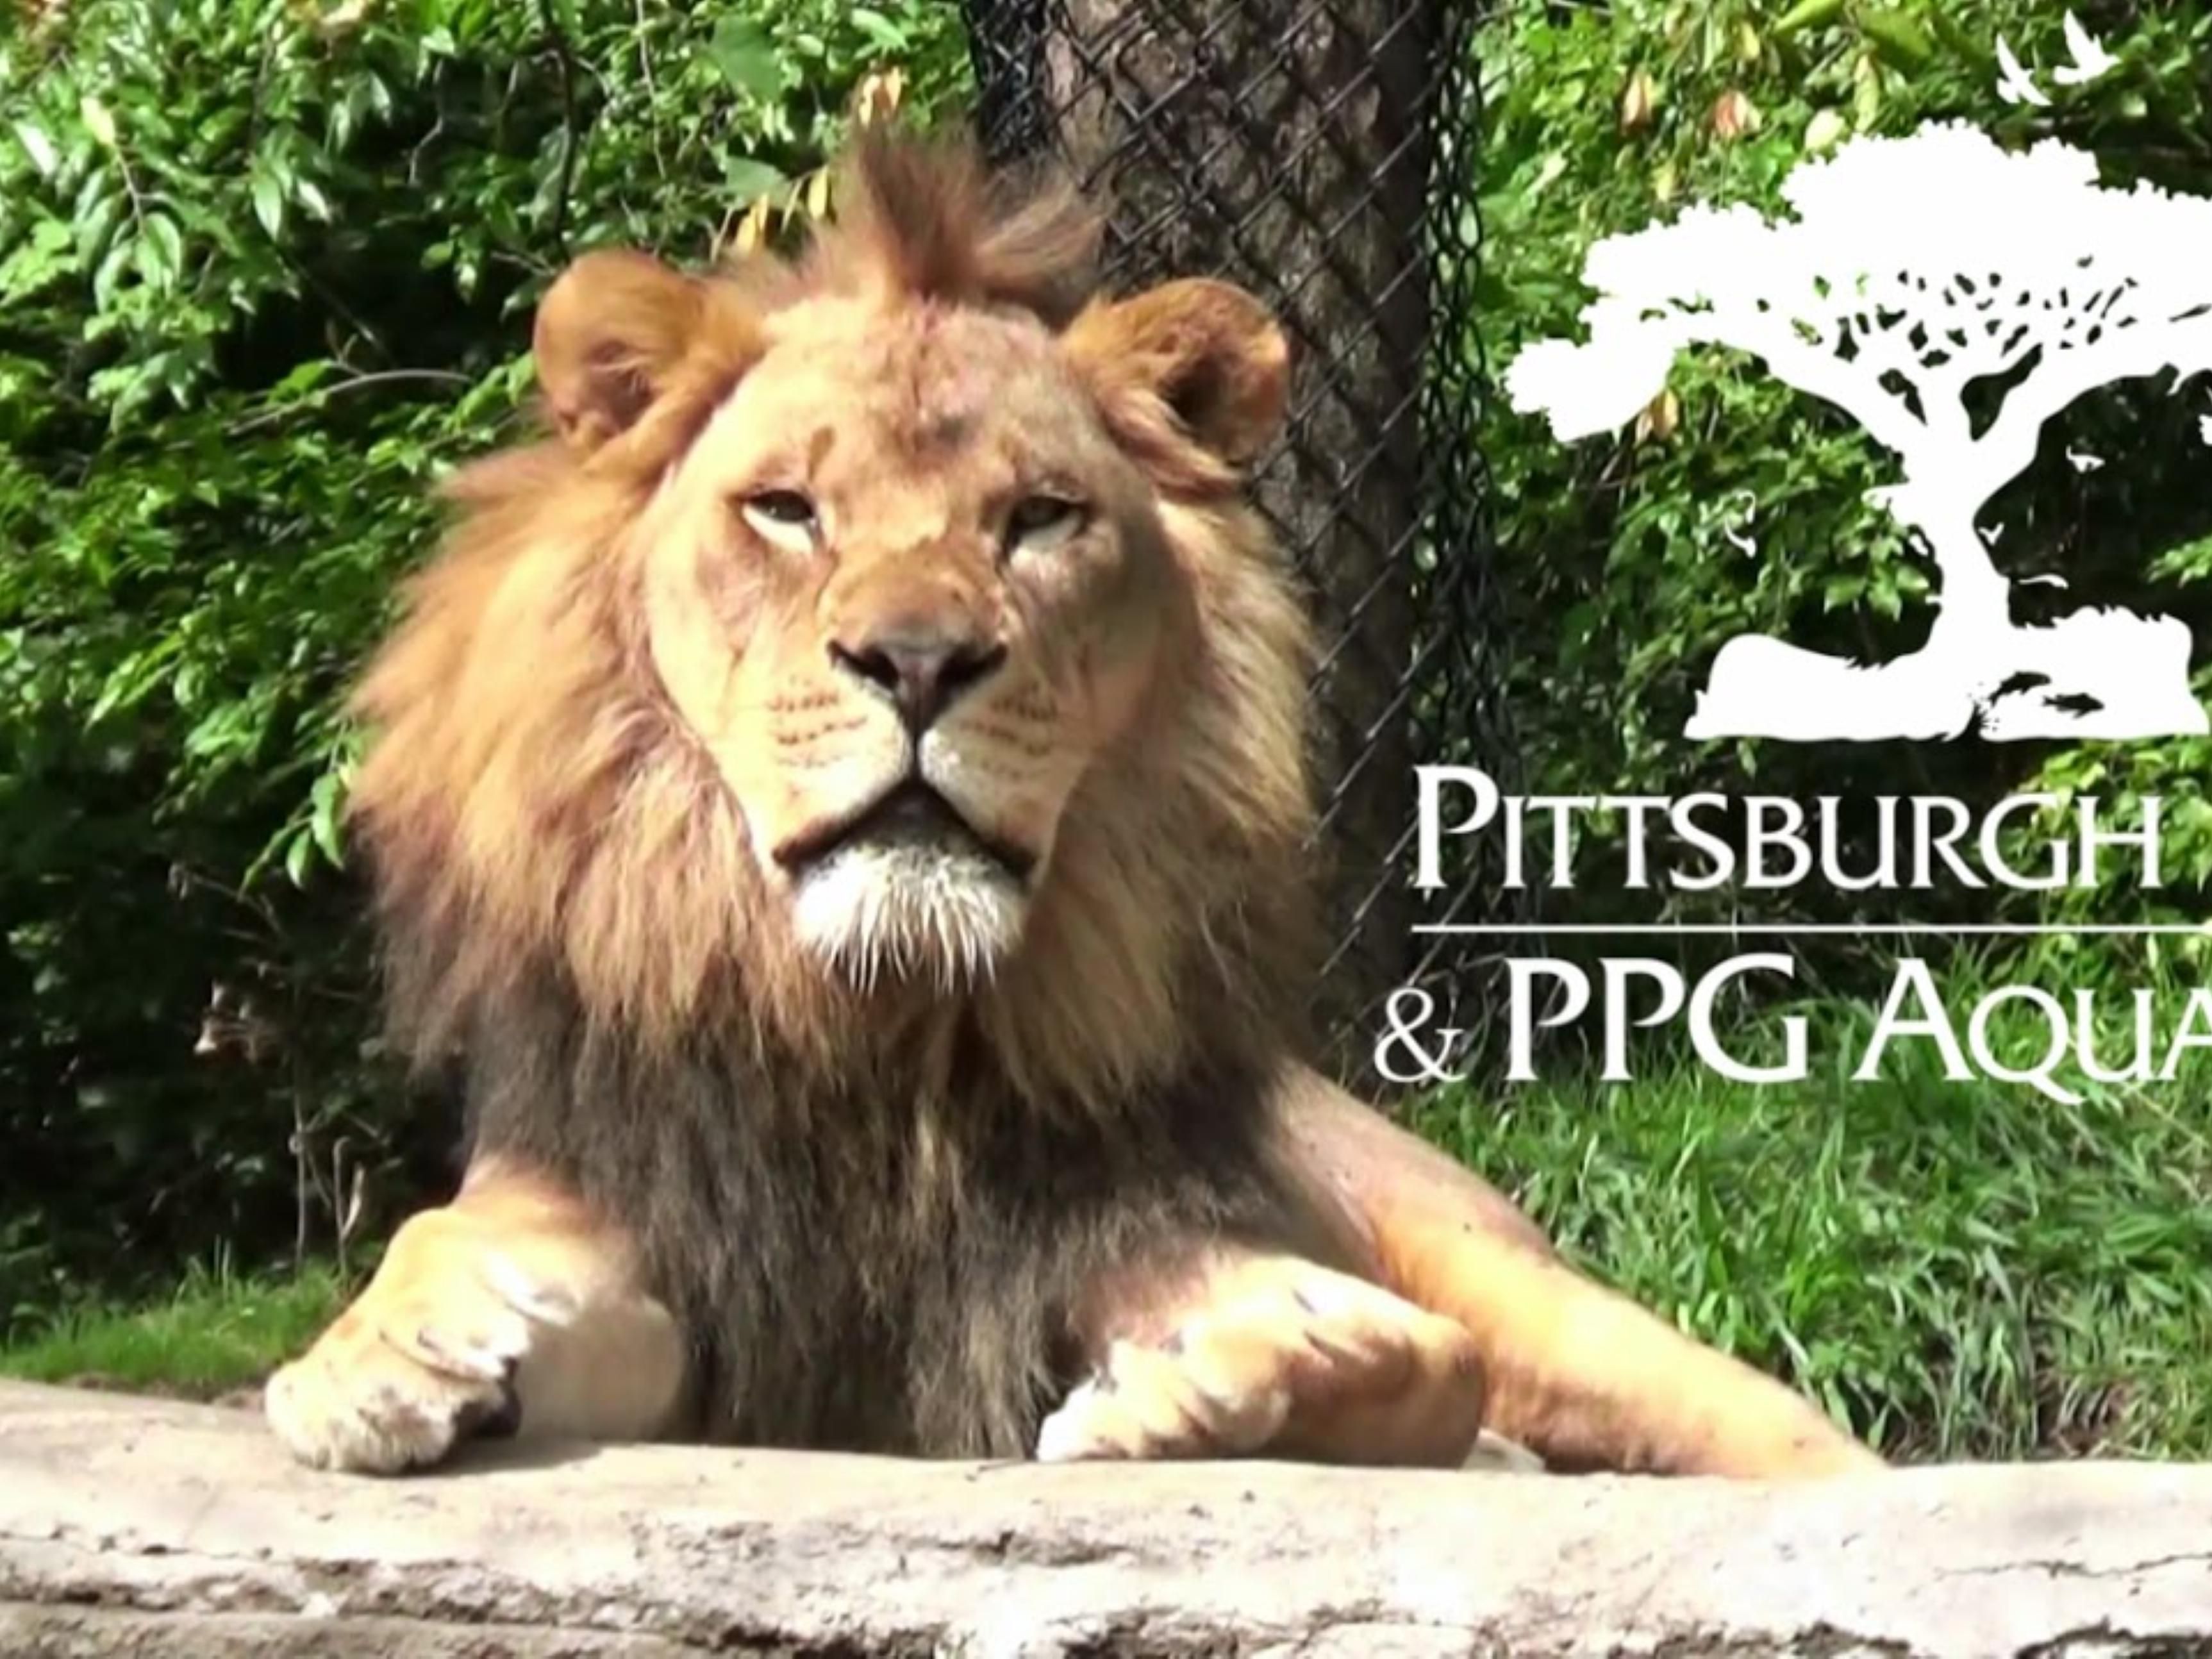 Don't forget to visit the Pittsburgh Zoo and PPG Aquarium